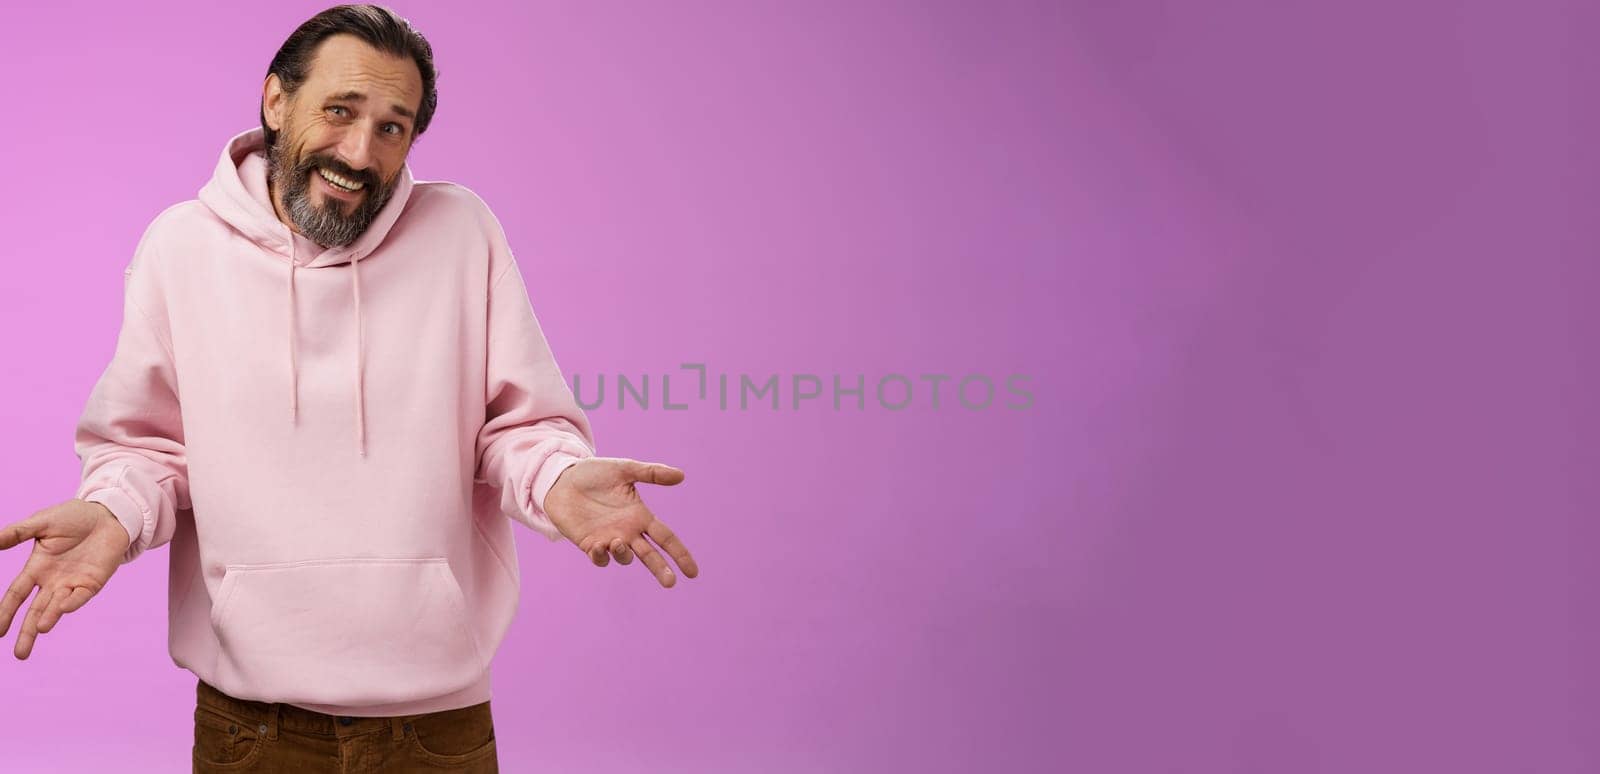 Portrait doubtful unsure awkward mature man shrugging spread hands sideways clueless cringing frowning hesitant cannot say yes no facing hard decision standing perplexed purple background.